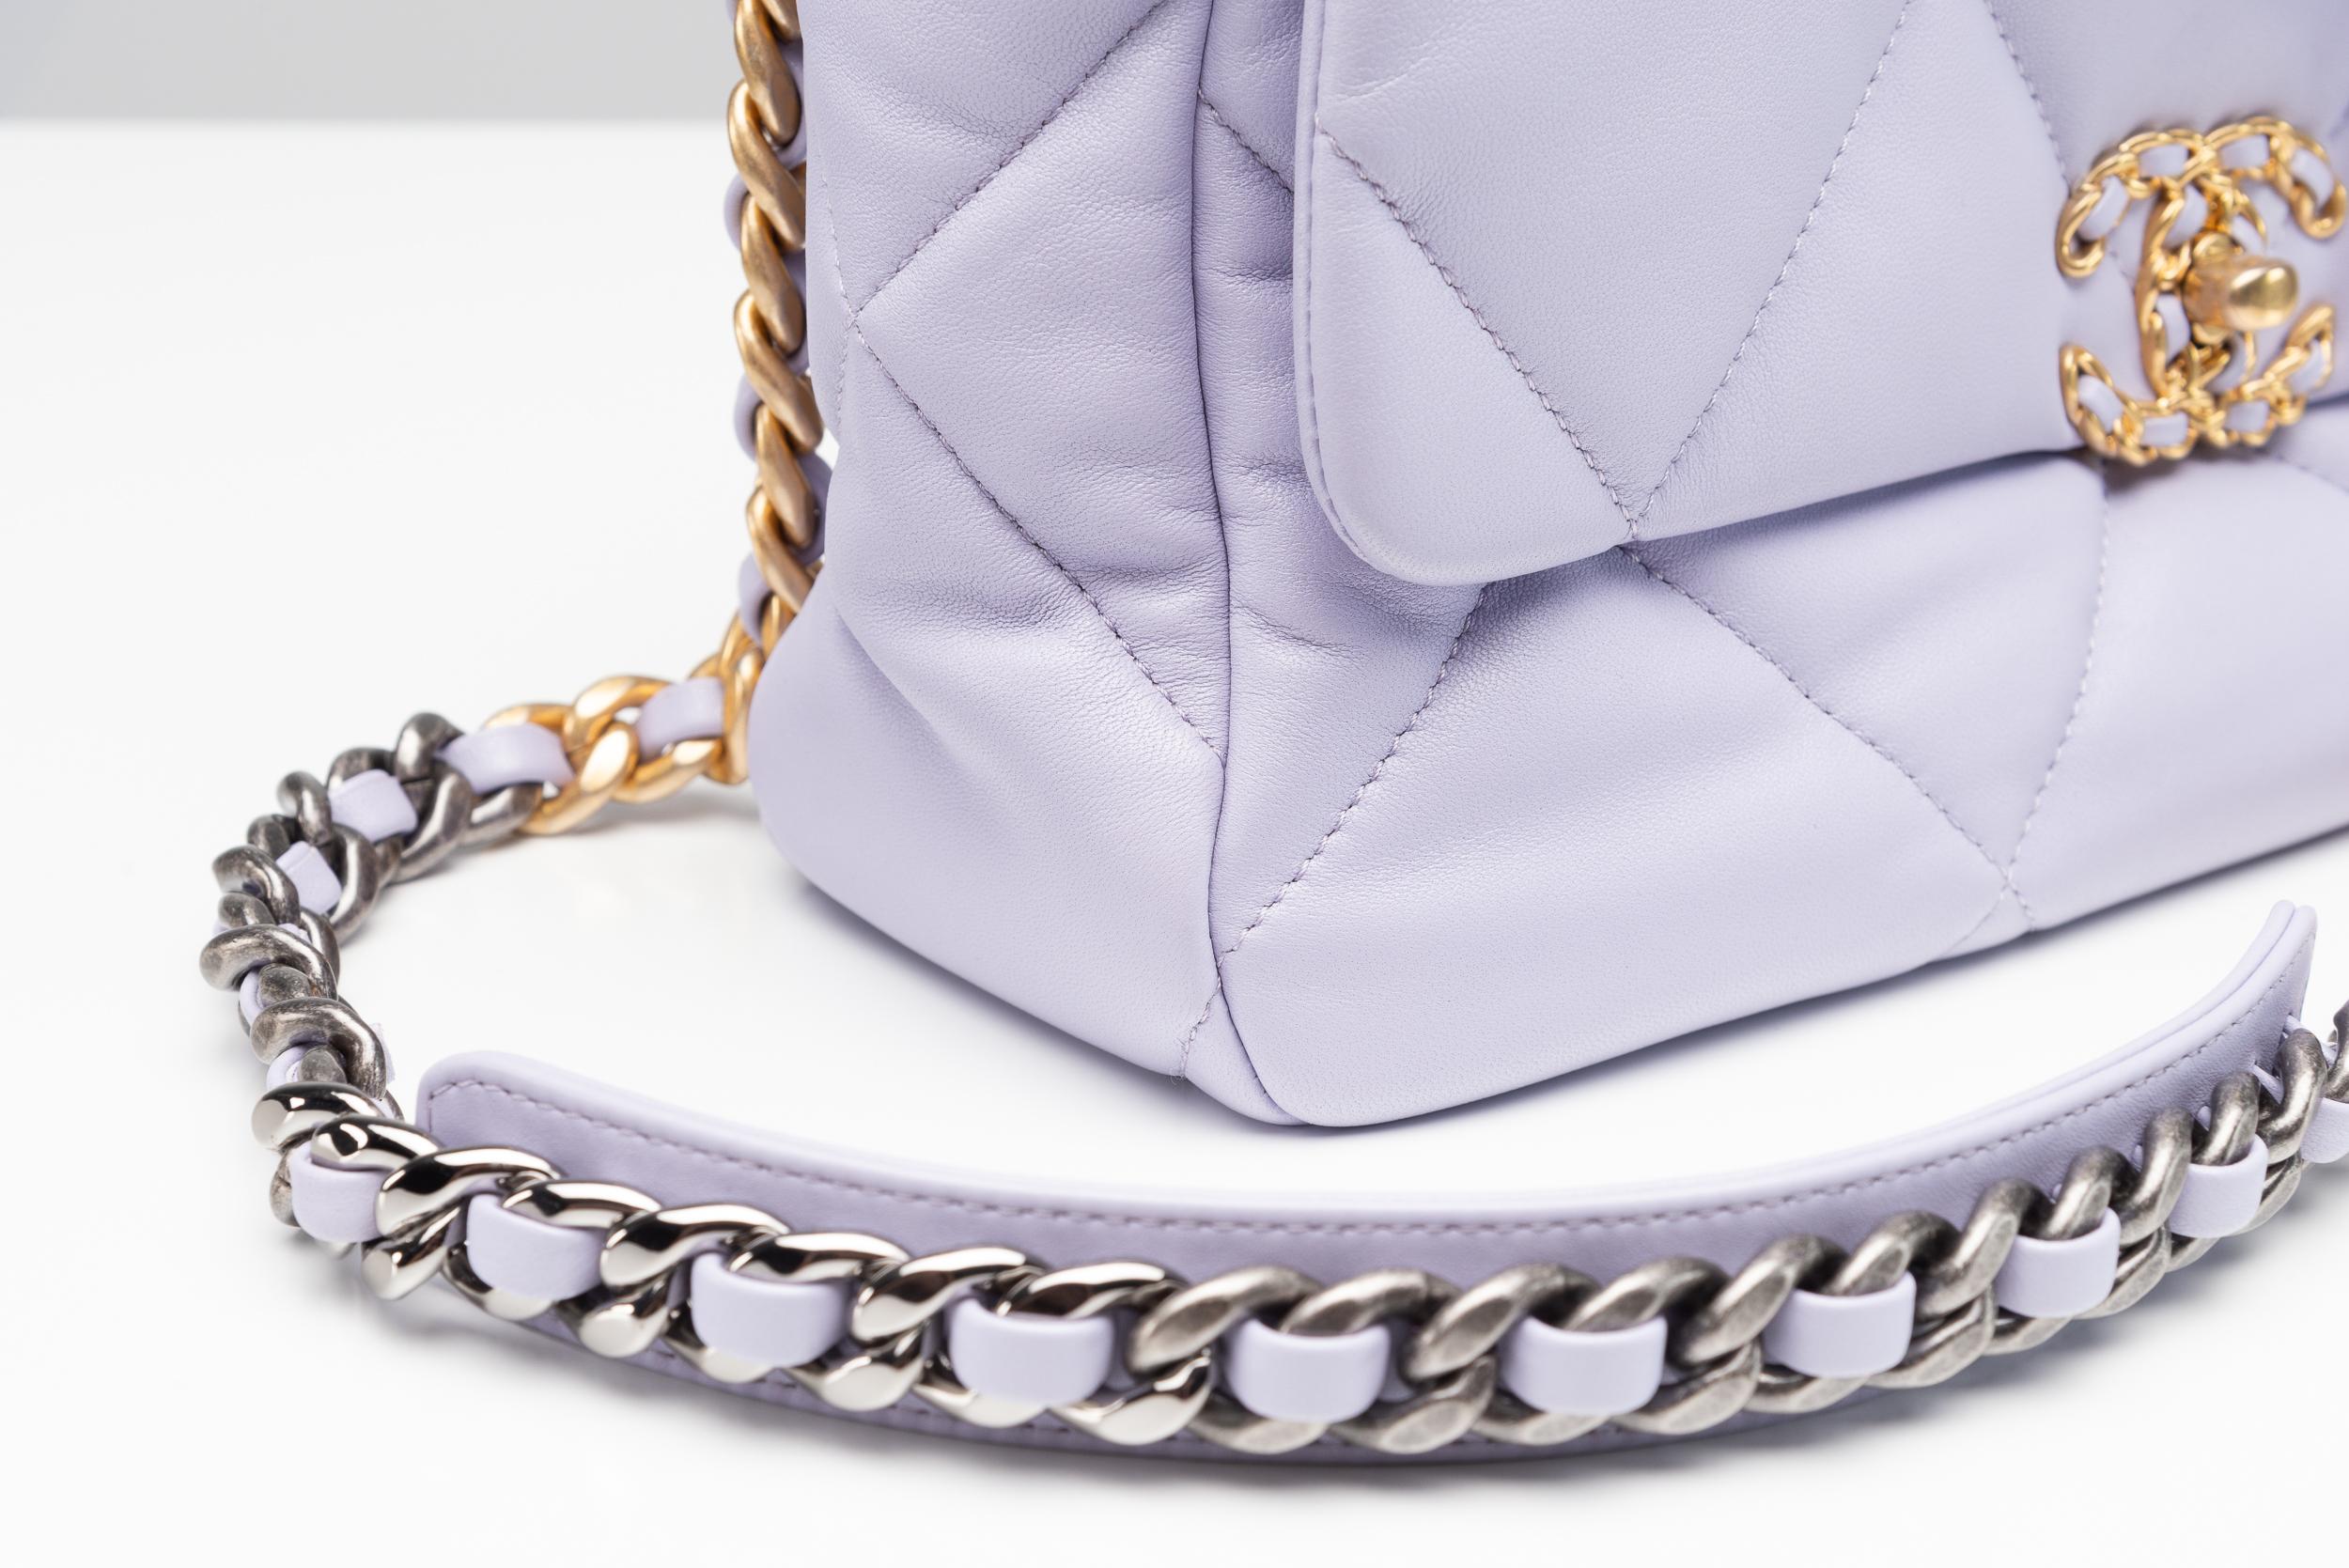 Chanel 19 Quilted Lambskin Lilac Large Flap Bag NEW 4